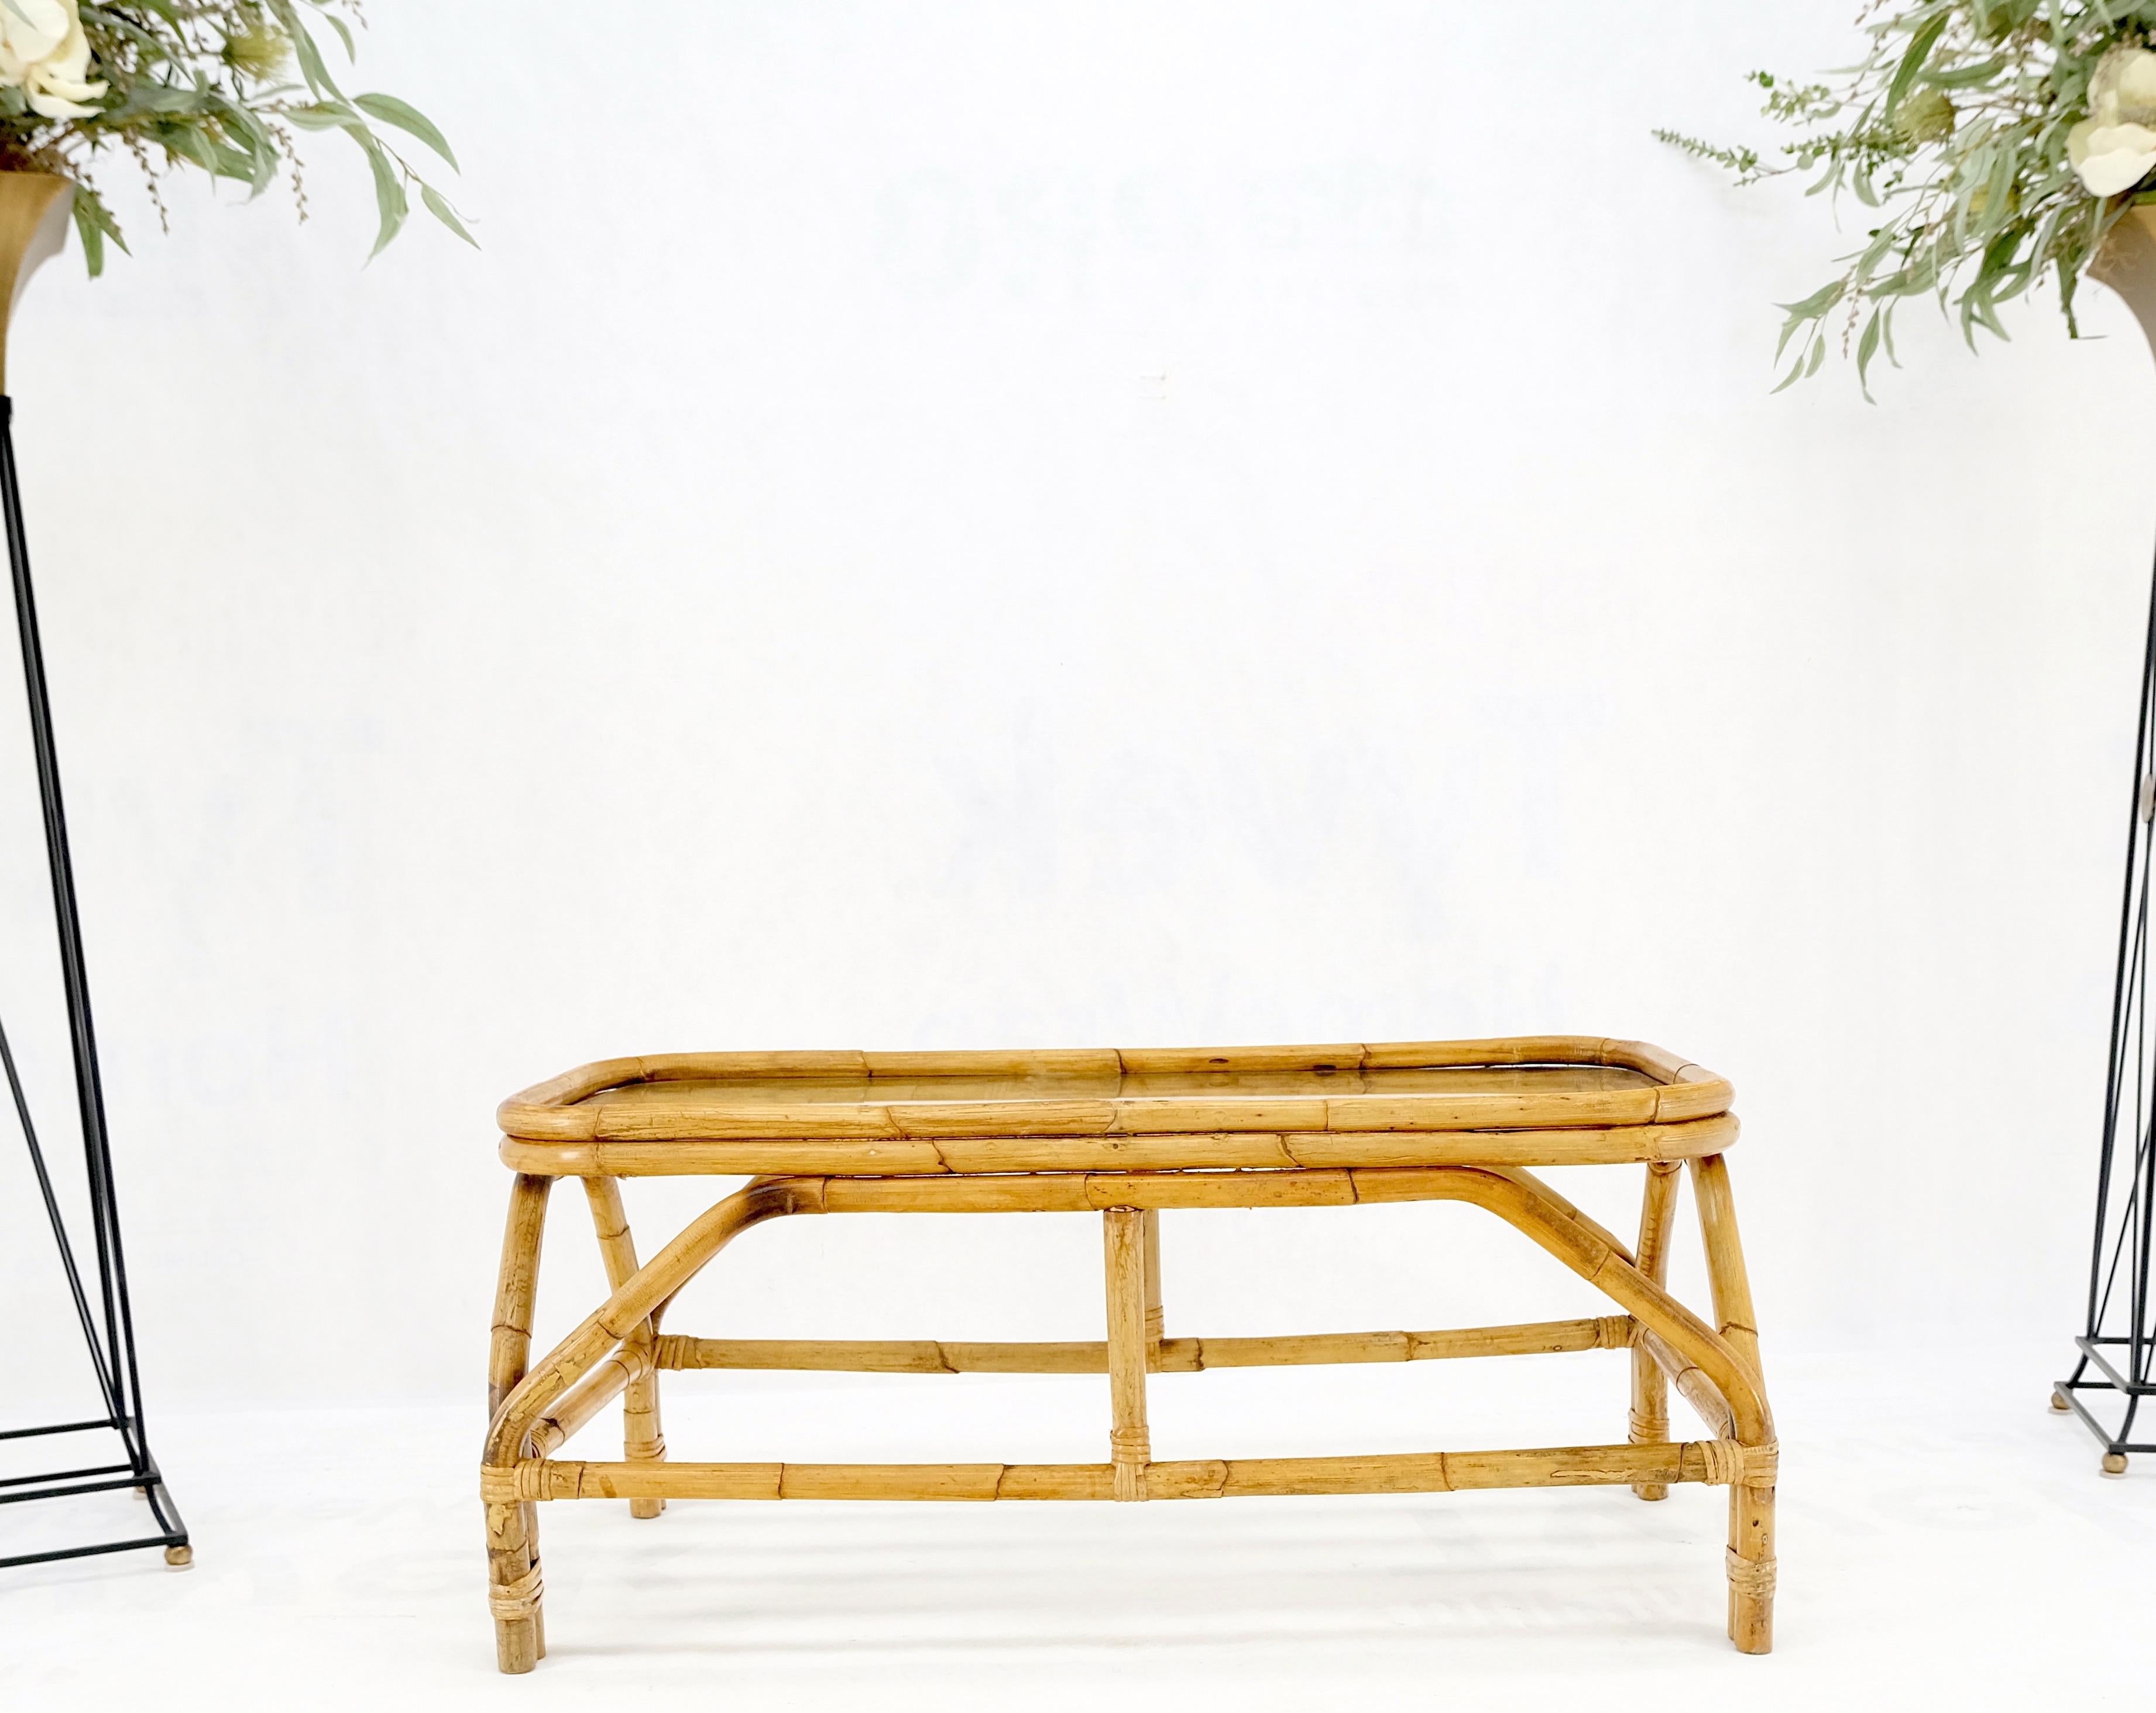 20th Century Rattan Bamboo Rectangle Glass Top Mid-Century Modern Coffee Table Mnt! For Sale